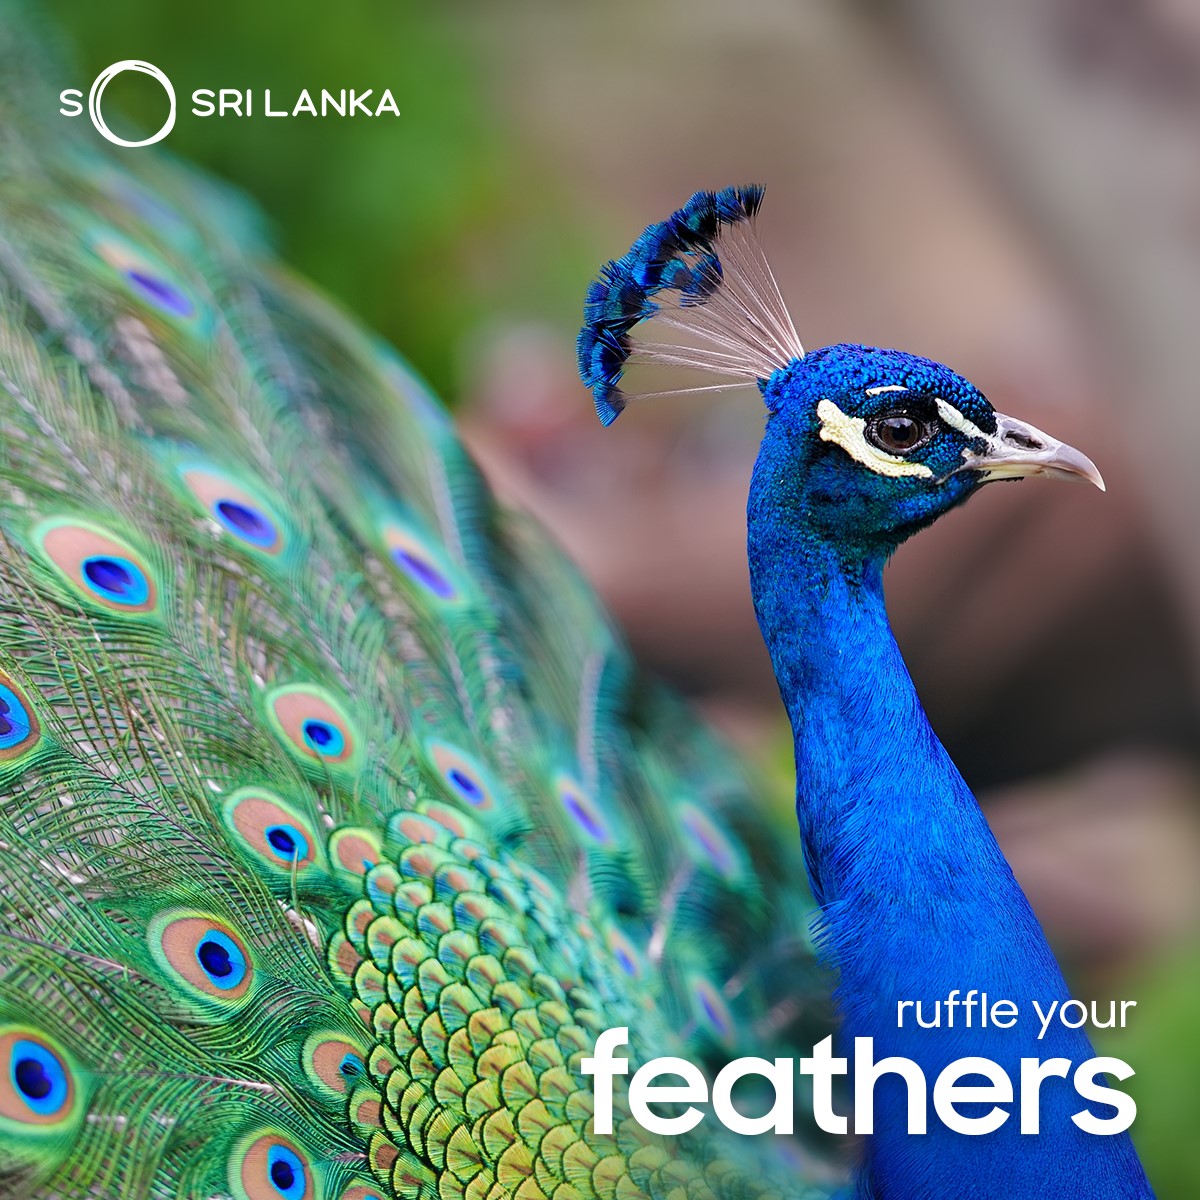 A splash of bright blue amidst the green is sure to ruffle your feathers.